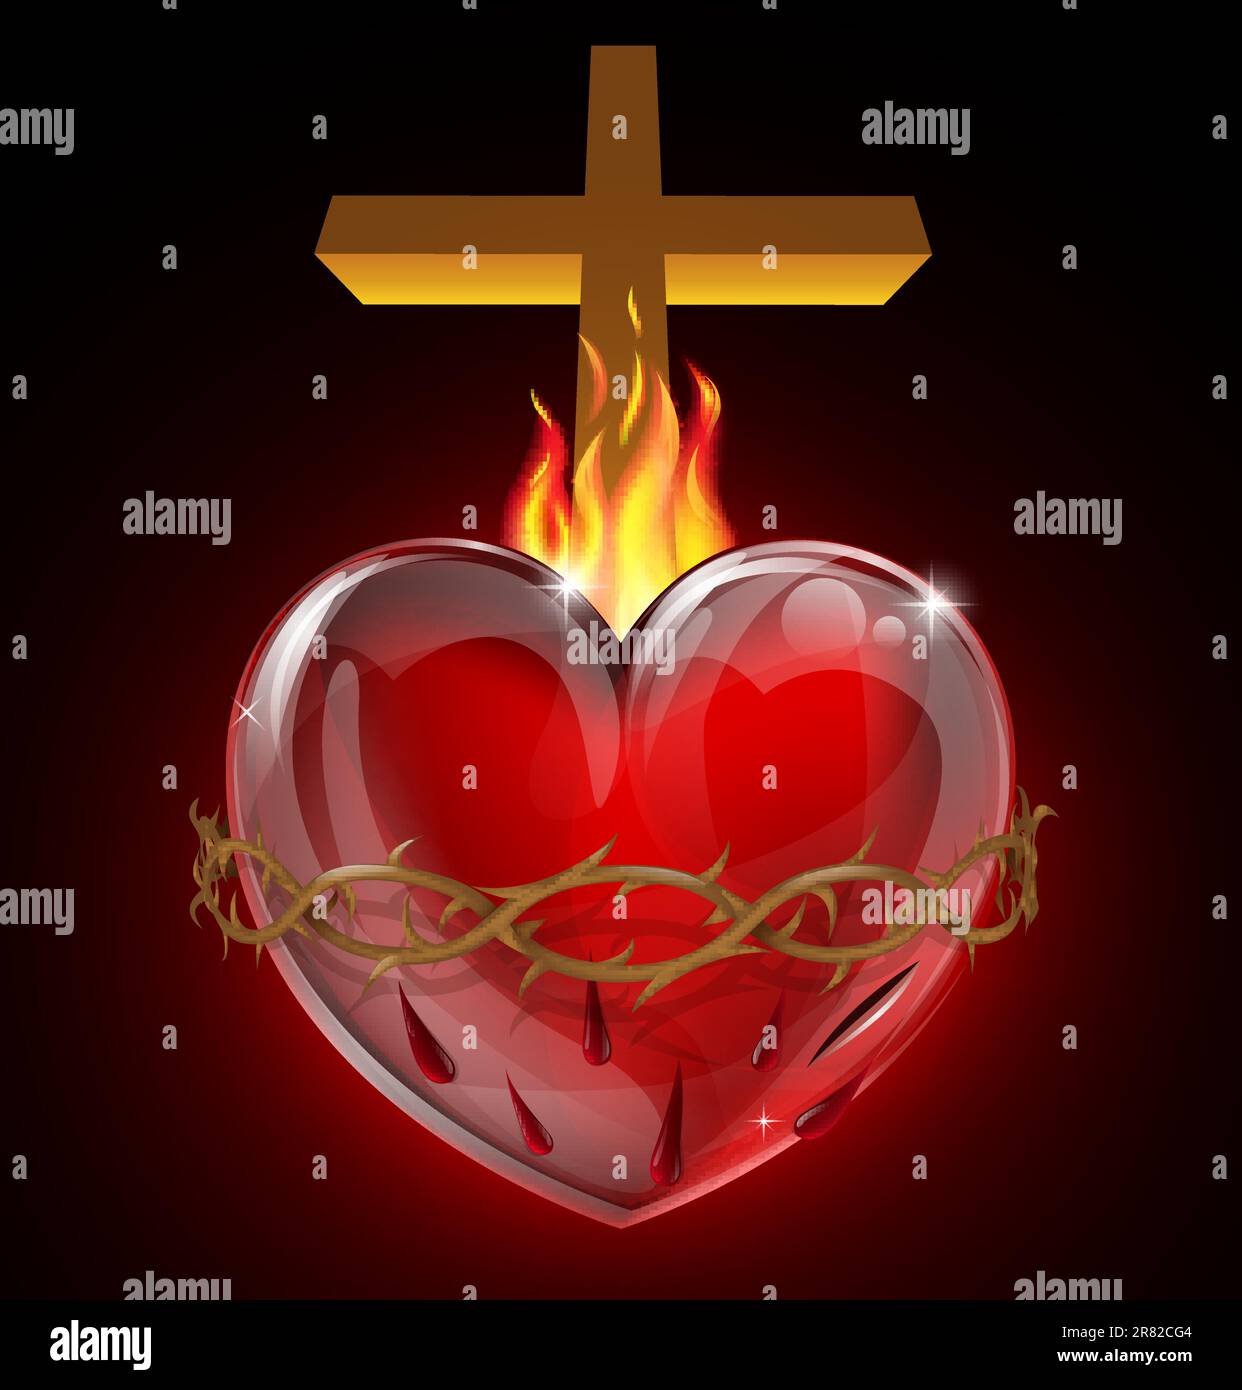 Illustration of the Most Sacred Heart of Jesus. A bleeding heart with flames, pierced by a lance wound with crown of thorns and cross. Stock Vector